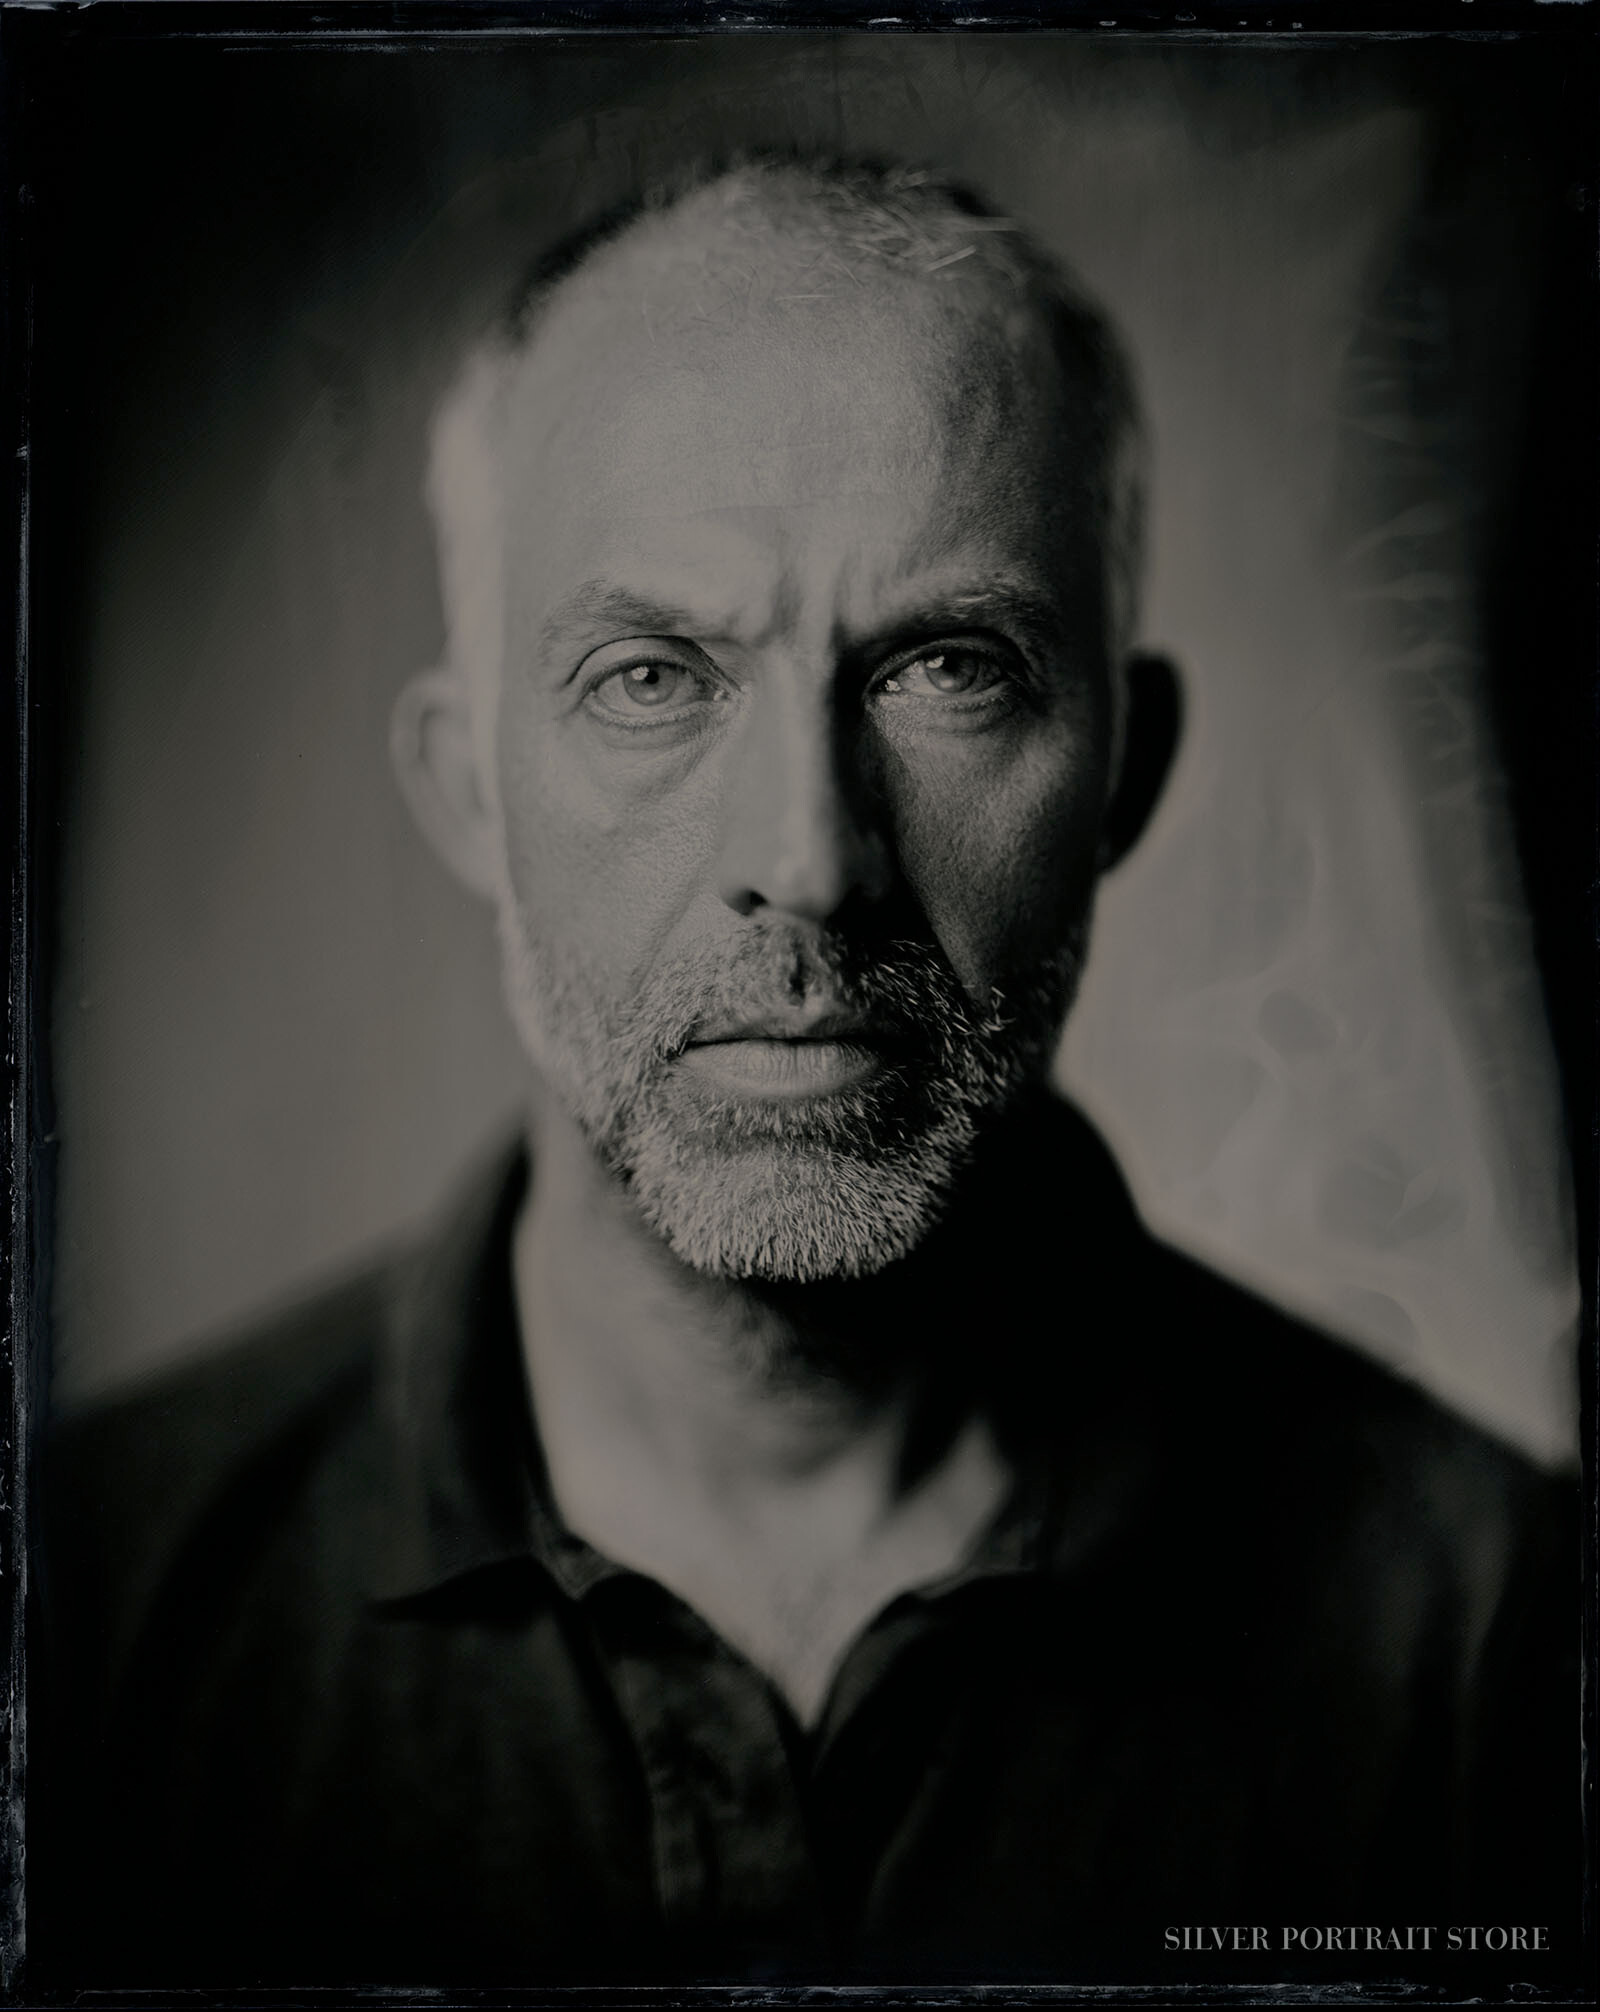 Cedric-Silver Portrait Store-Scan from Wet plate collodion-Tintype 20 x 25 cm